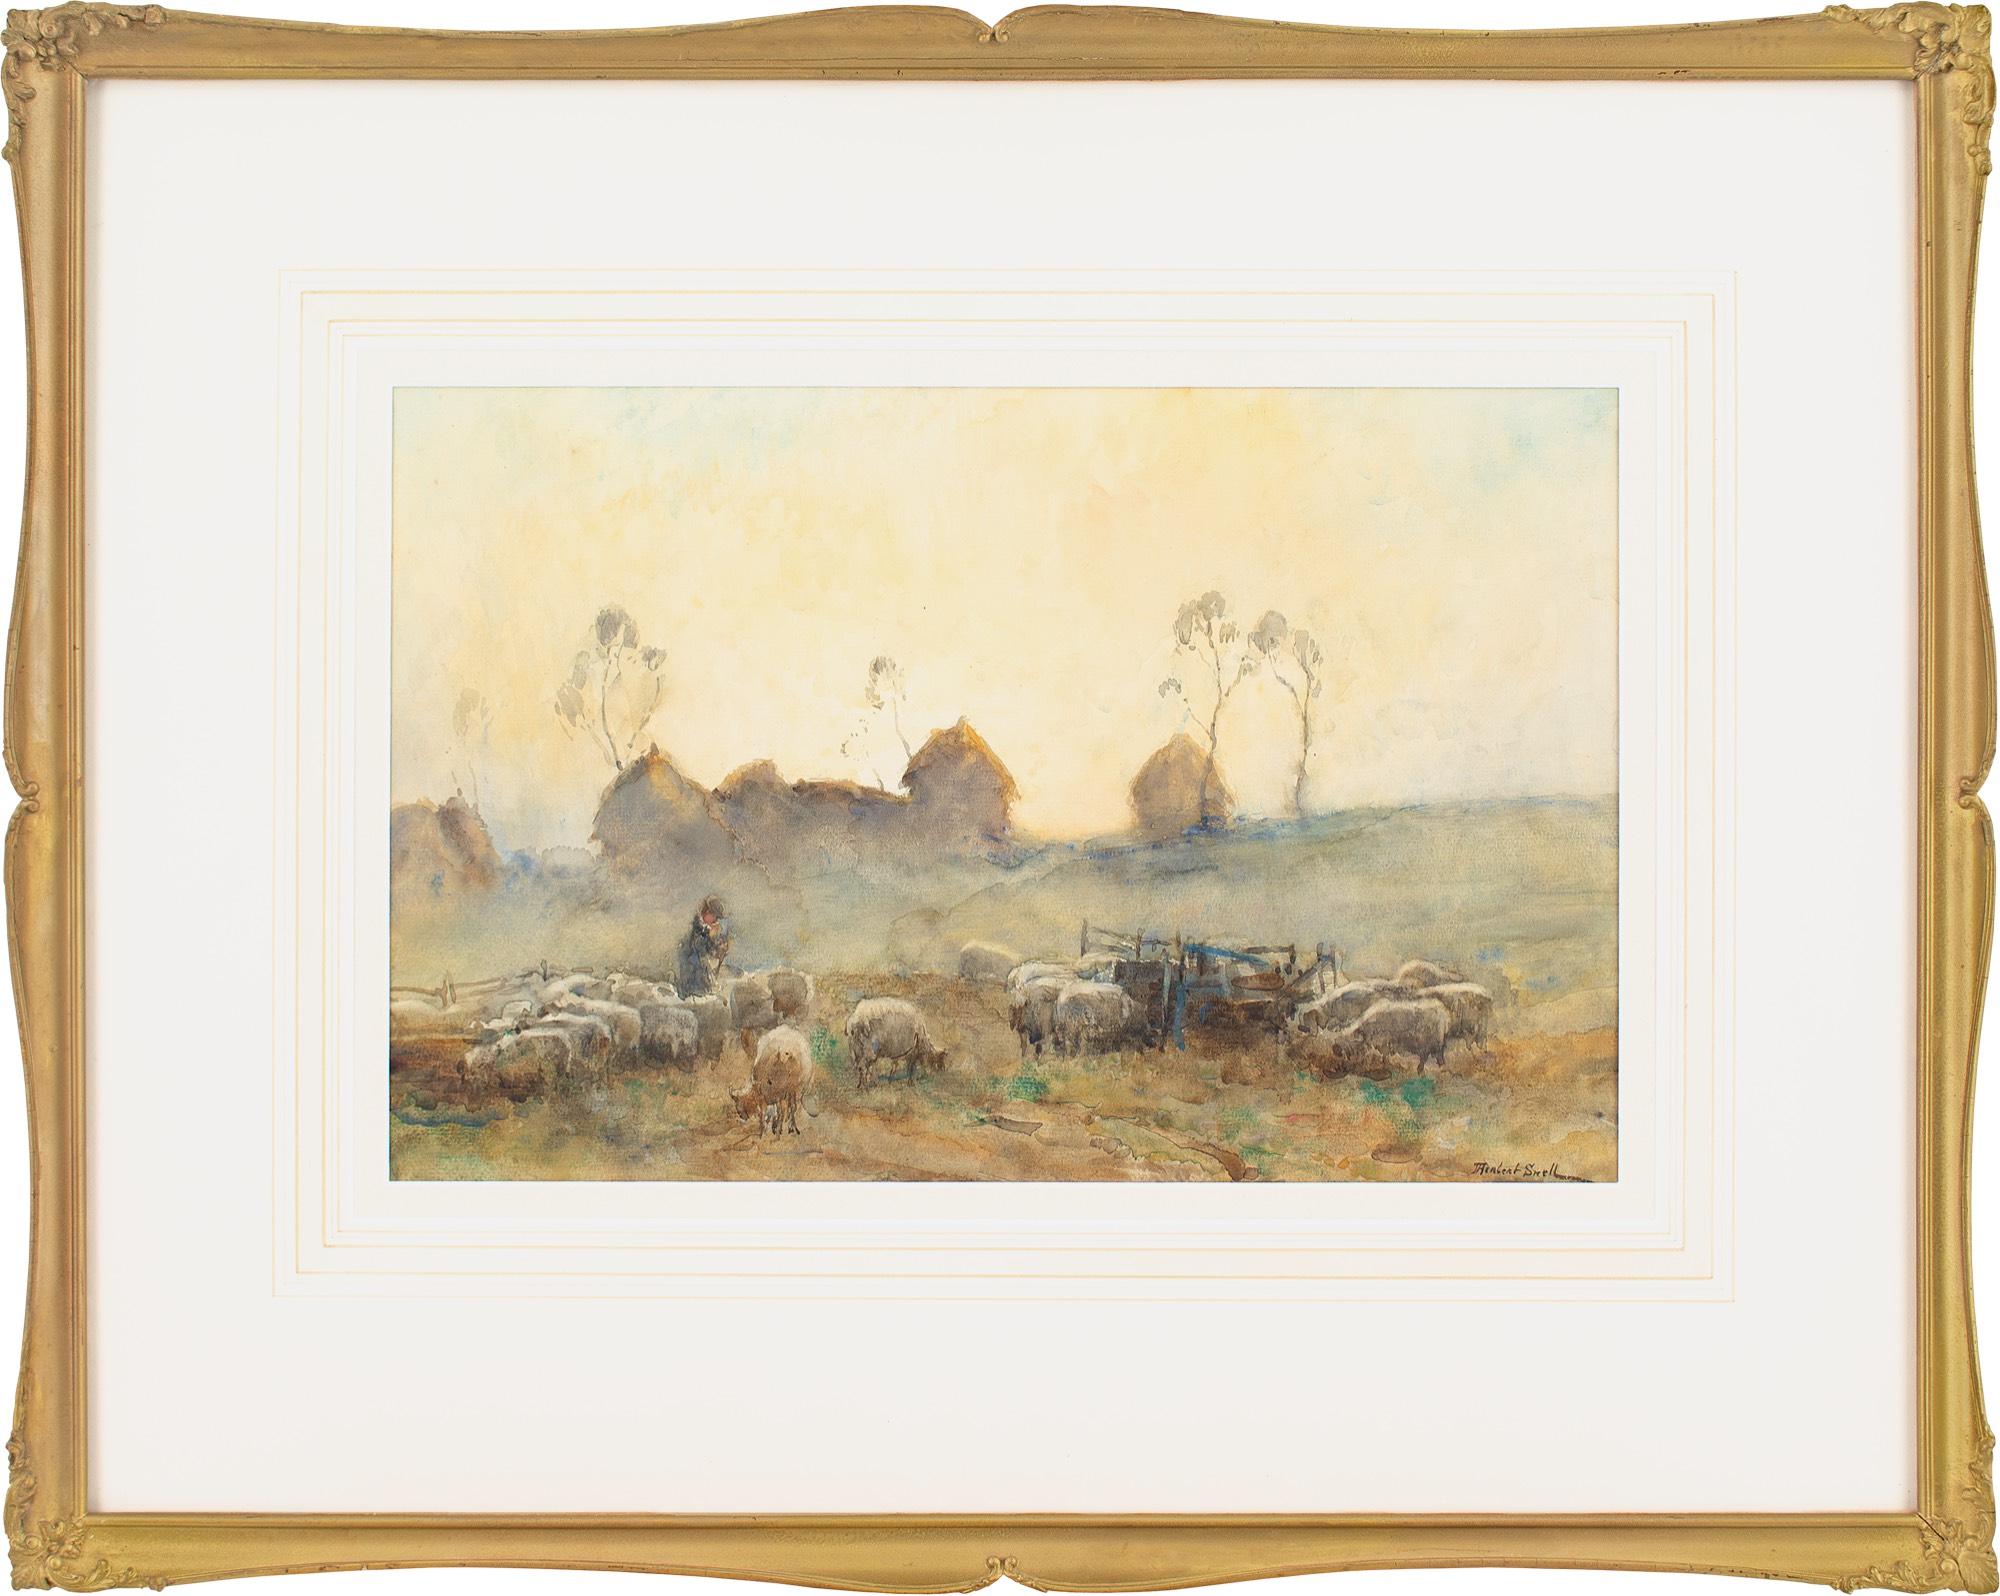 This beautiful late 19th-century watercolour by British artist James Herbert Snell (1861-1935) depicts a shepherd herding sheep in the evening.

Snell was an interesting painter as his works span a transitional period for British art. Around 1880,